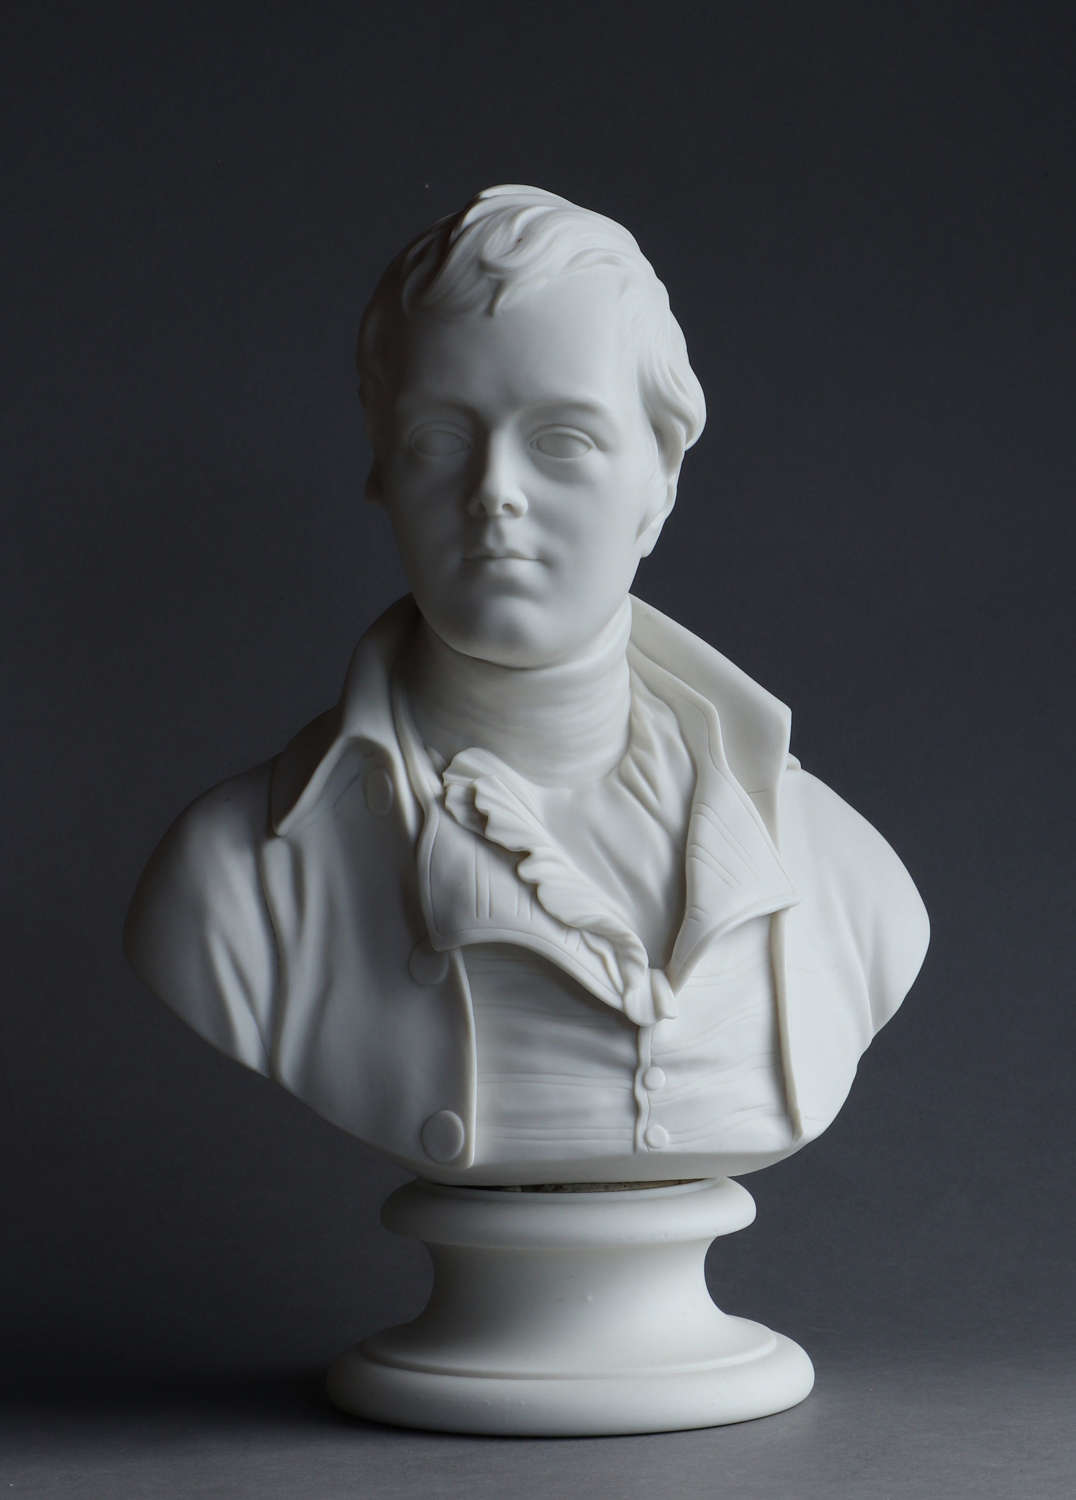 A large Parian bust of Robert Burns from Wyon, probably by Wedgwood